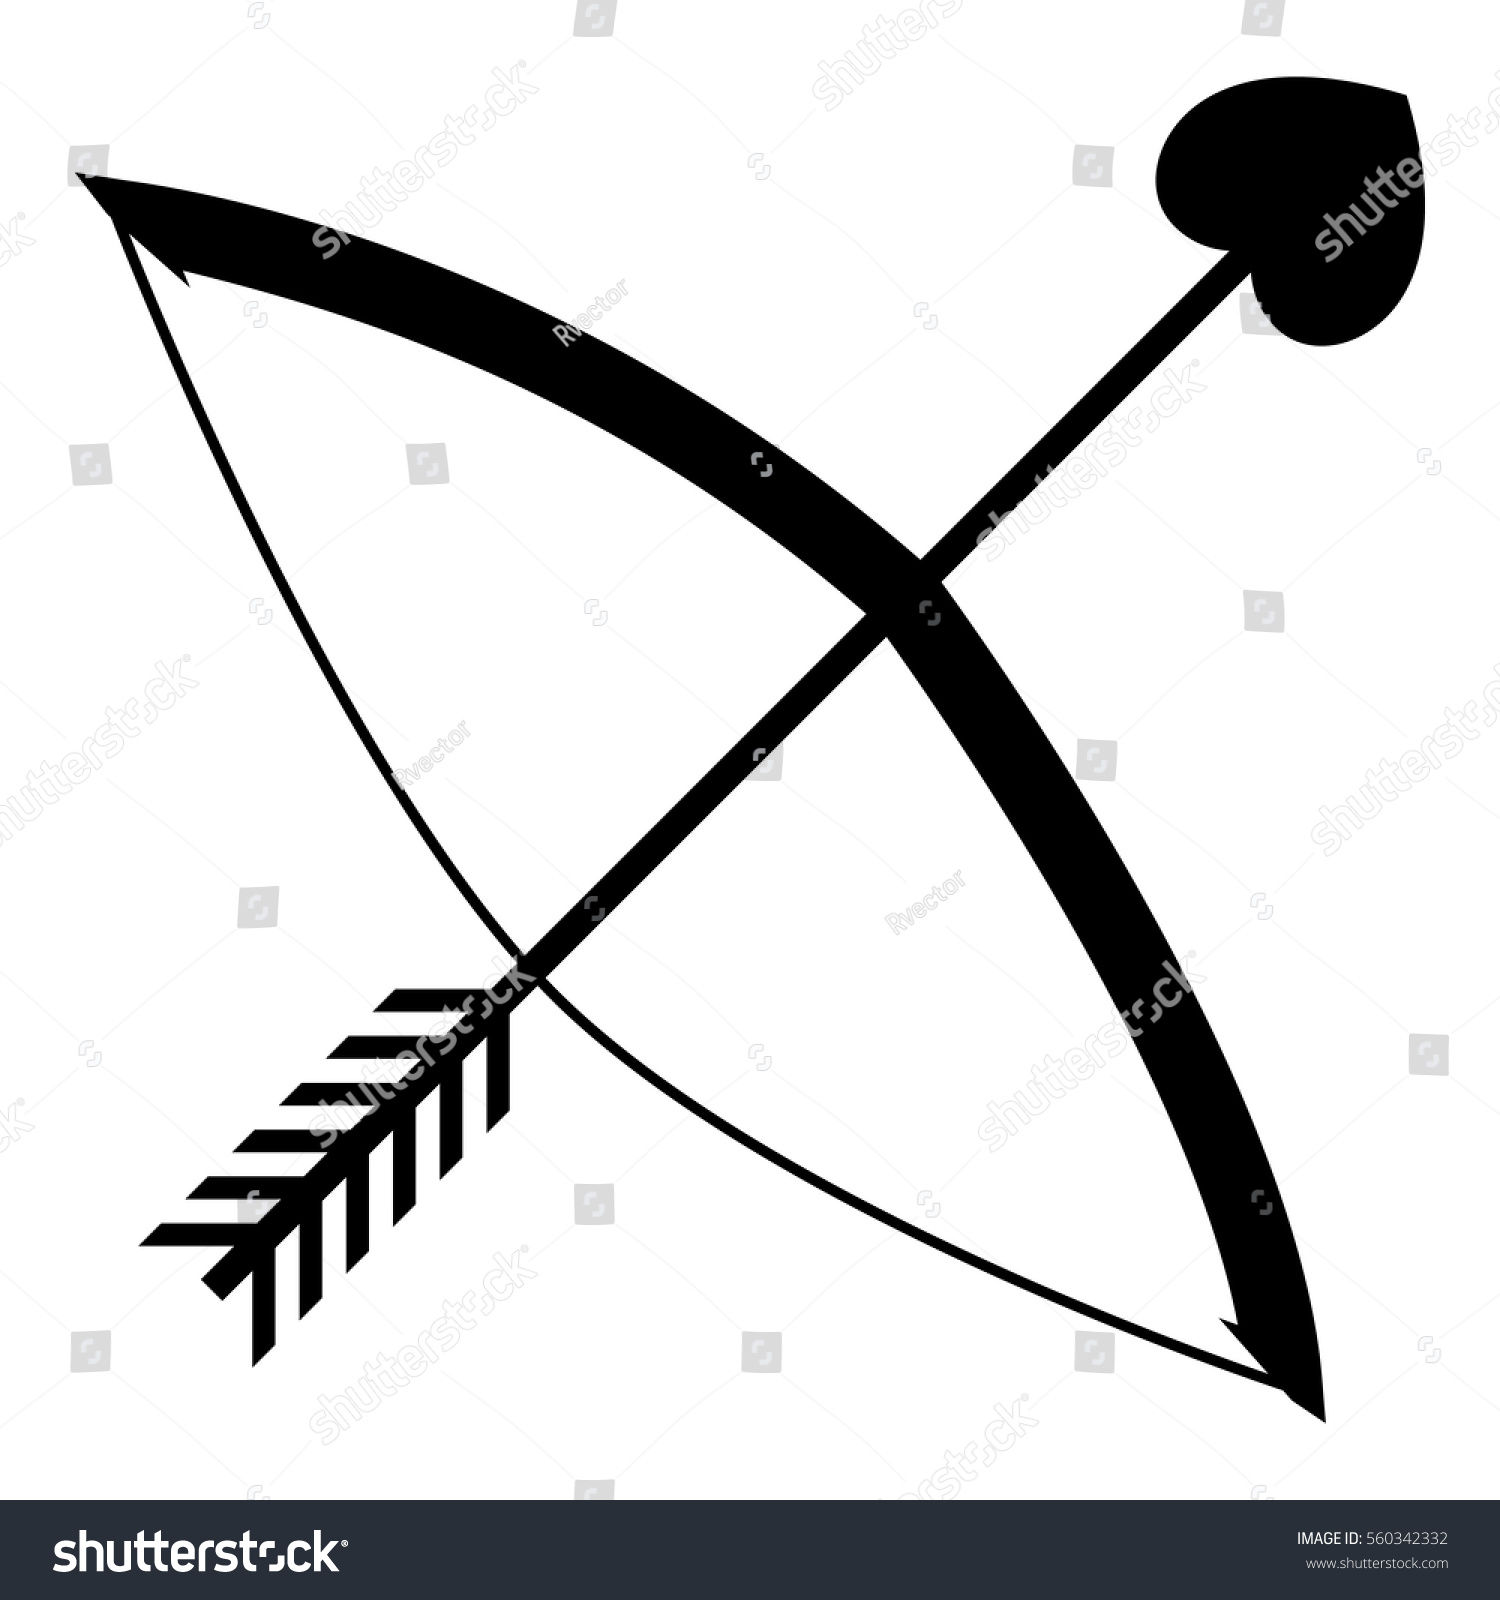 Cupids Bow Icon Simple Illustration Cupids Stock Vector Royalty Free 560342332 6698